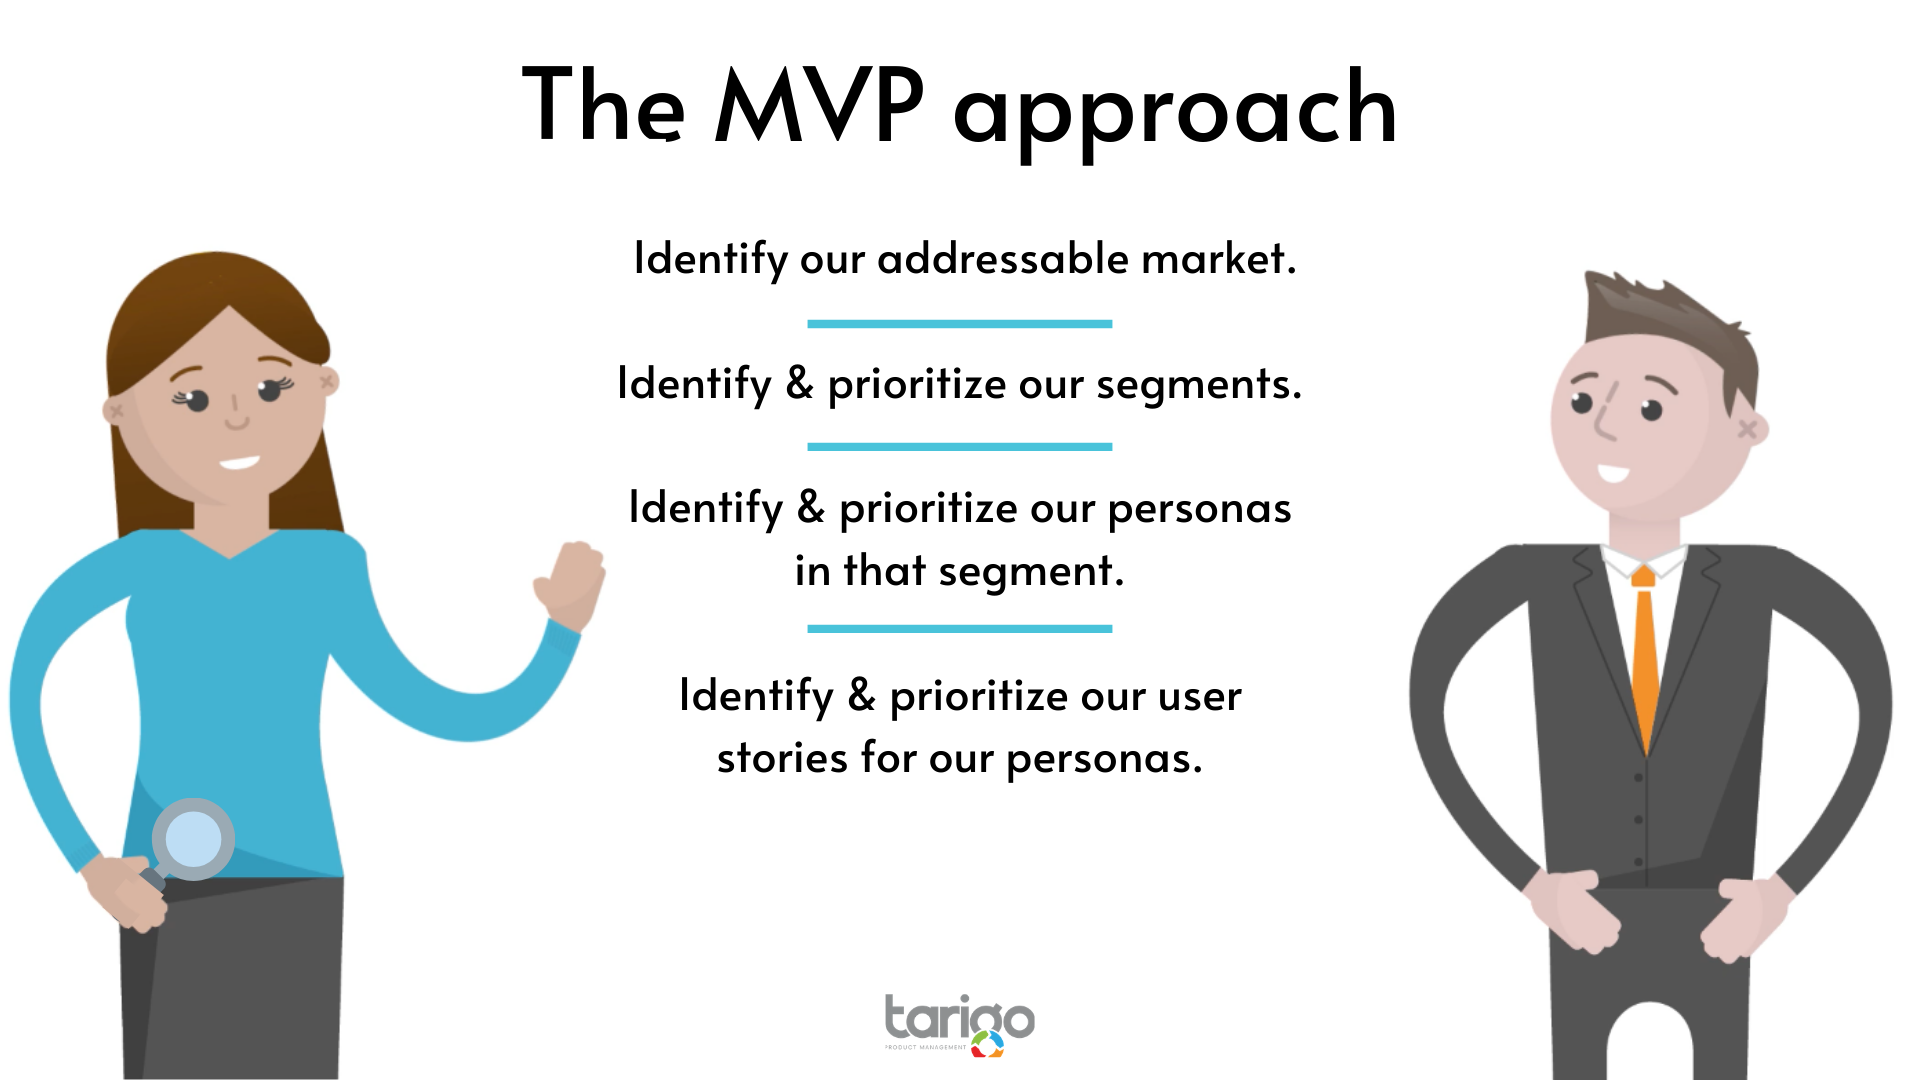 The MVP approach